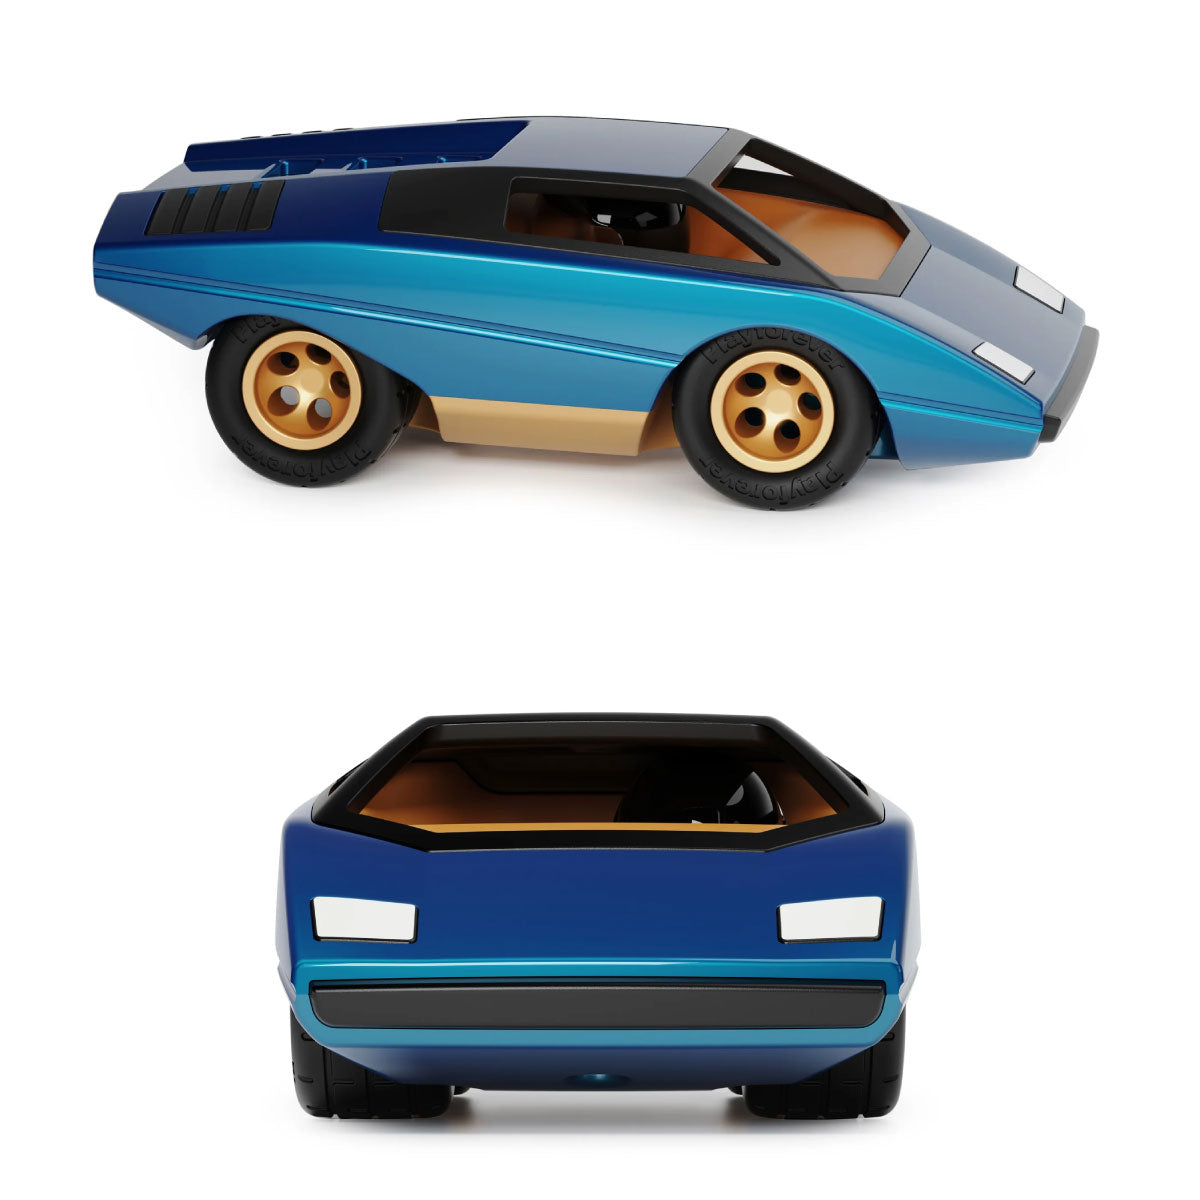 Playforever UFO Concept Car side and front views